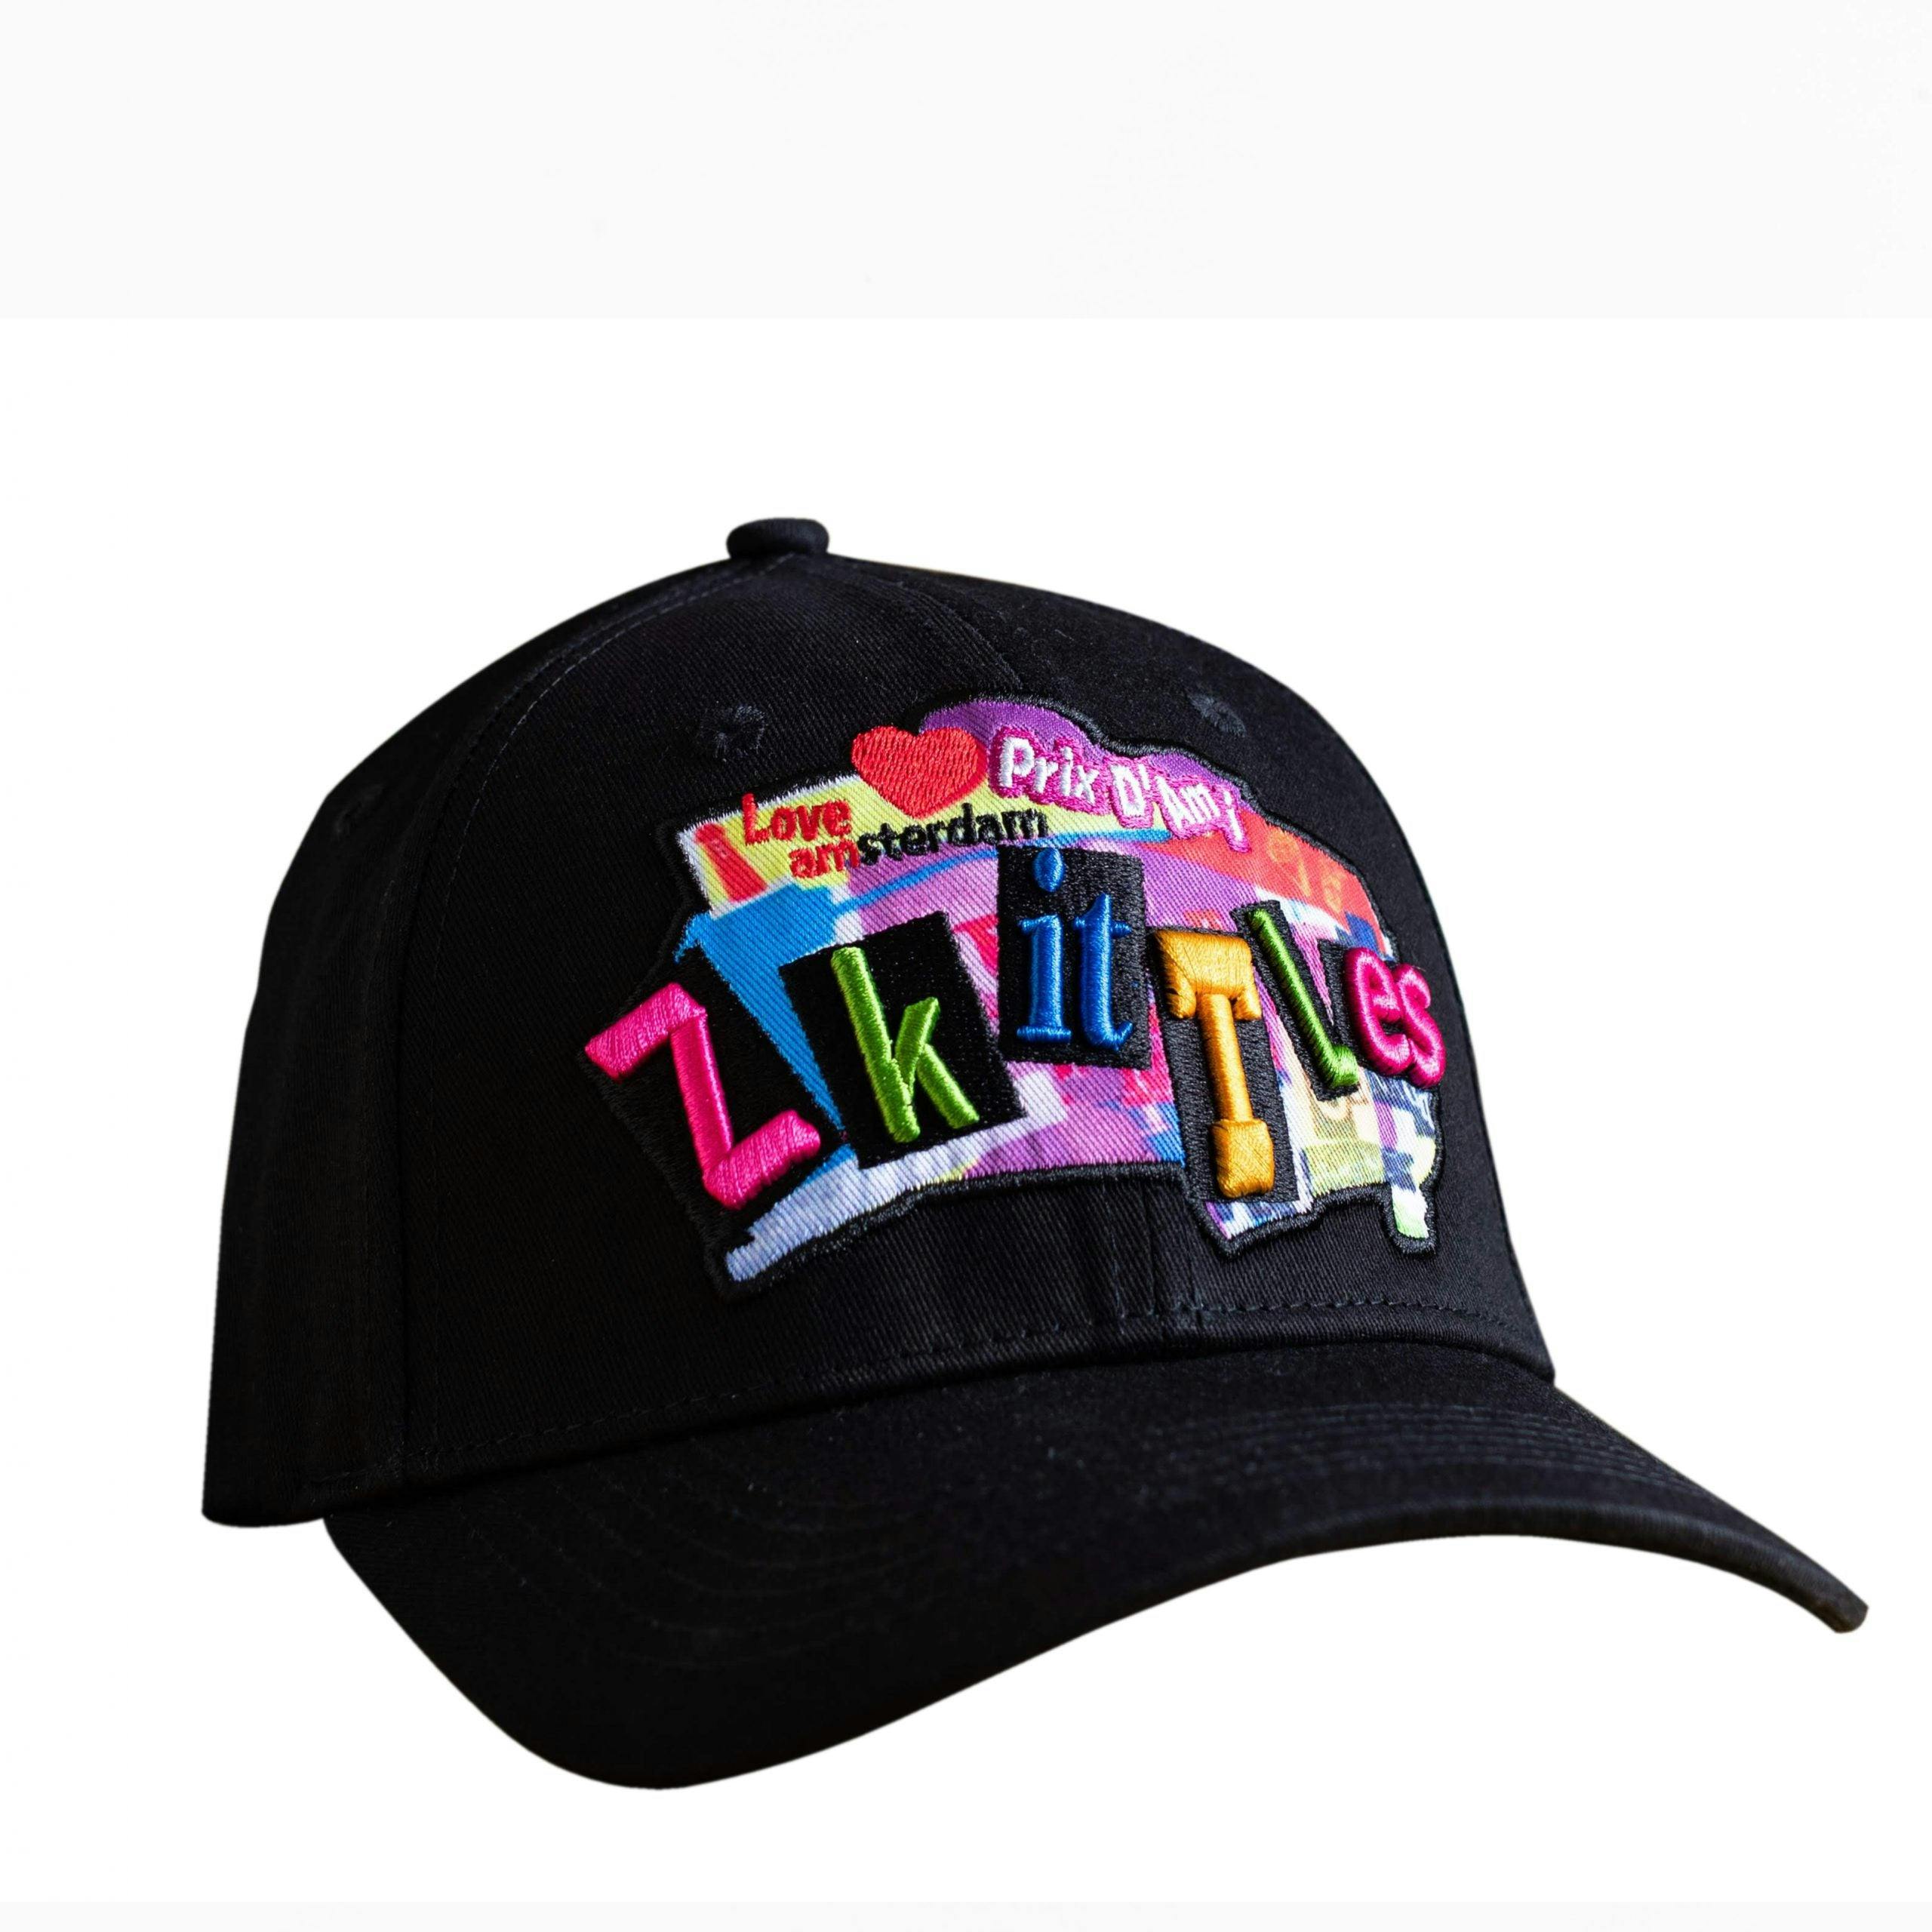 Zkittles Colorful Cap